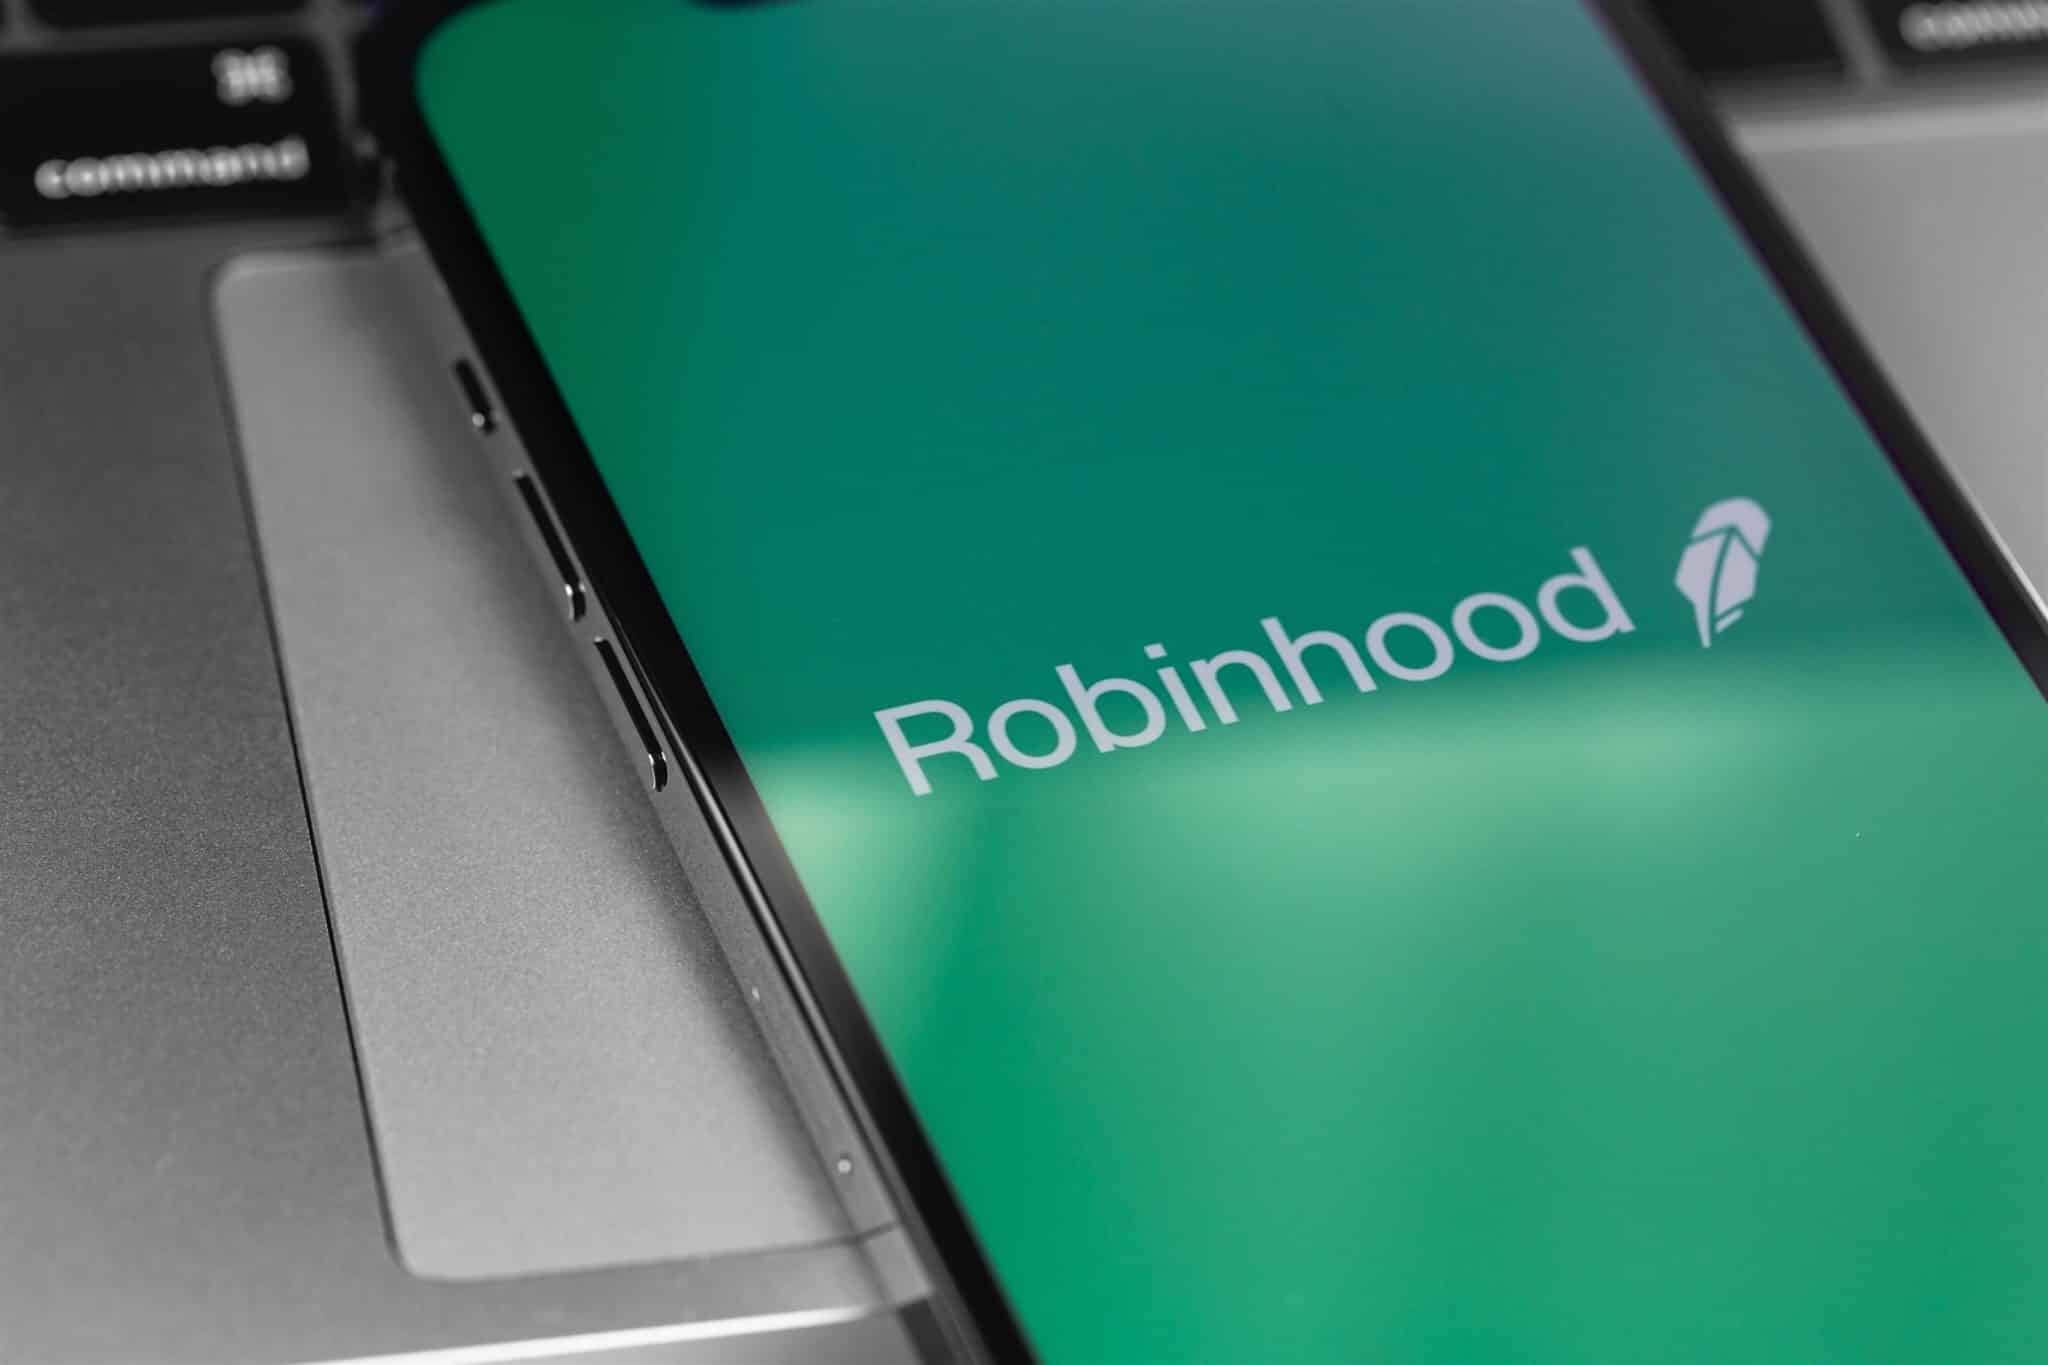 Robinhood Introduces Crypto Wallet, Perhaps too Late